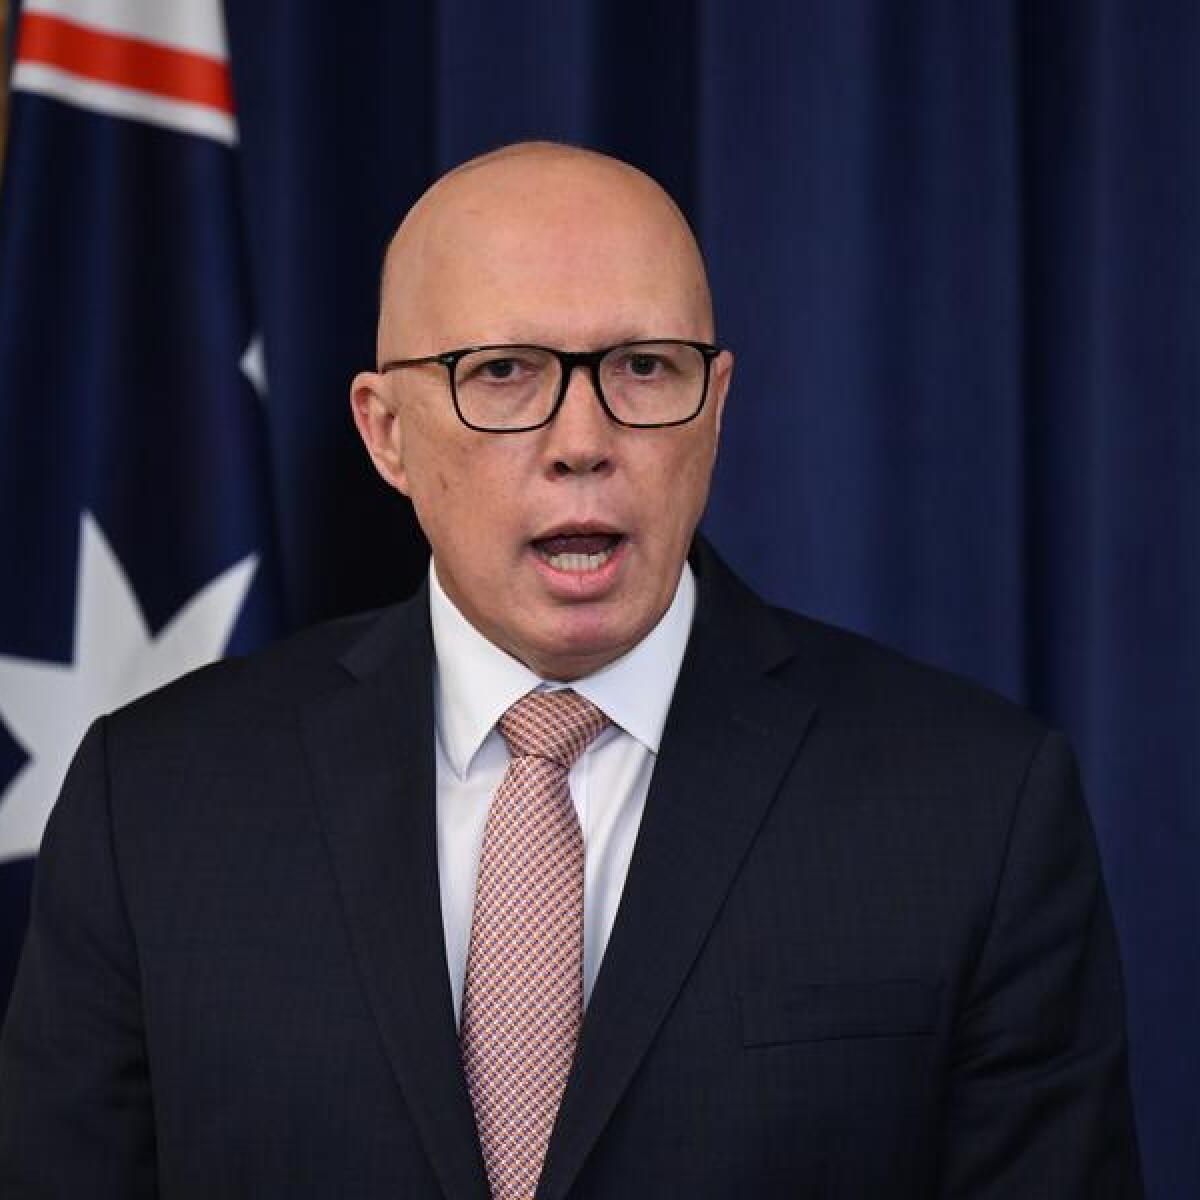 Peter Dutton at a press conference.